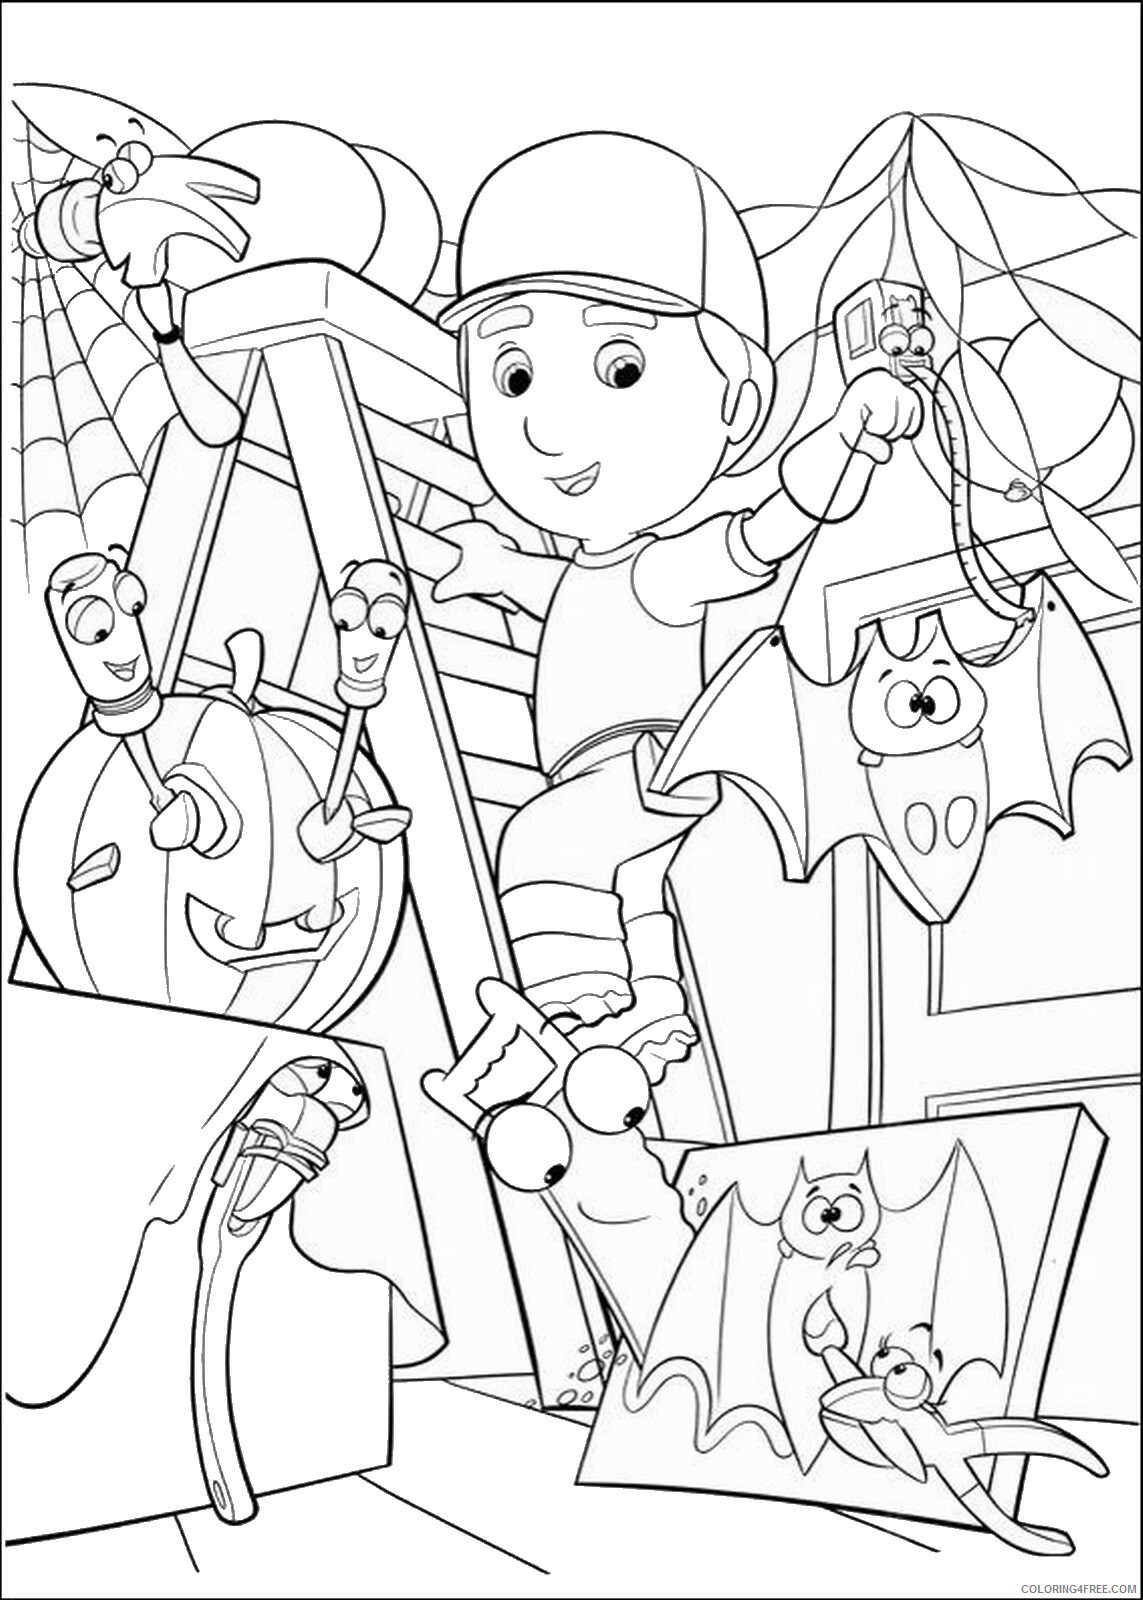 Handy Manny Coloring Pages TV Film handy_manny_coloring20 Printable 2020 03394 Coloring4free